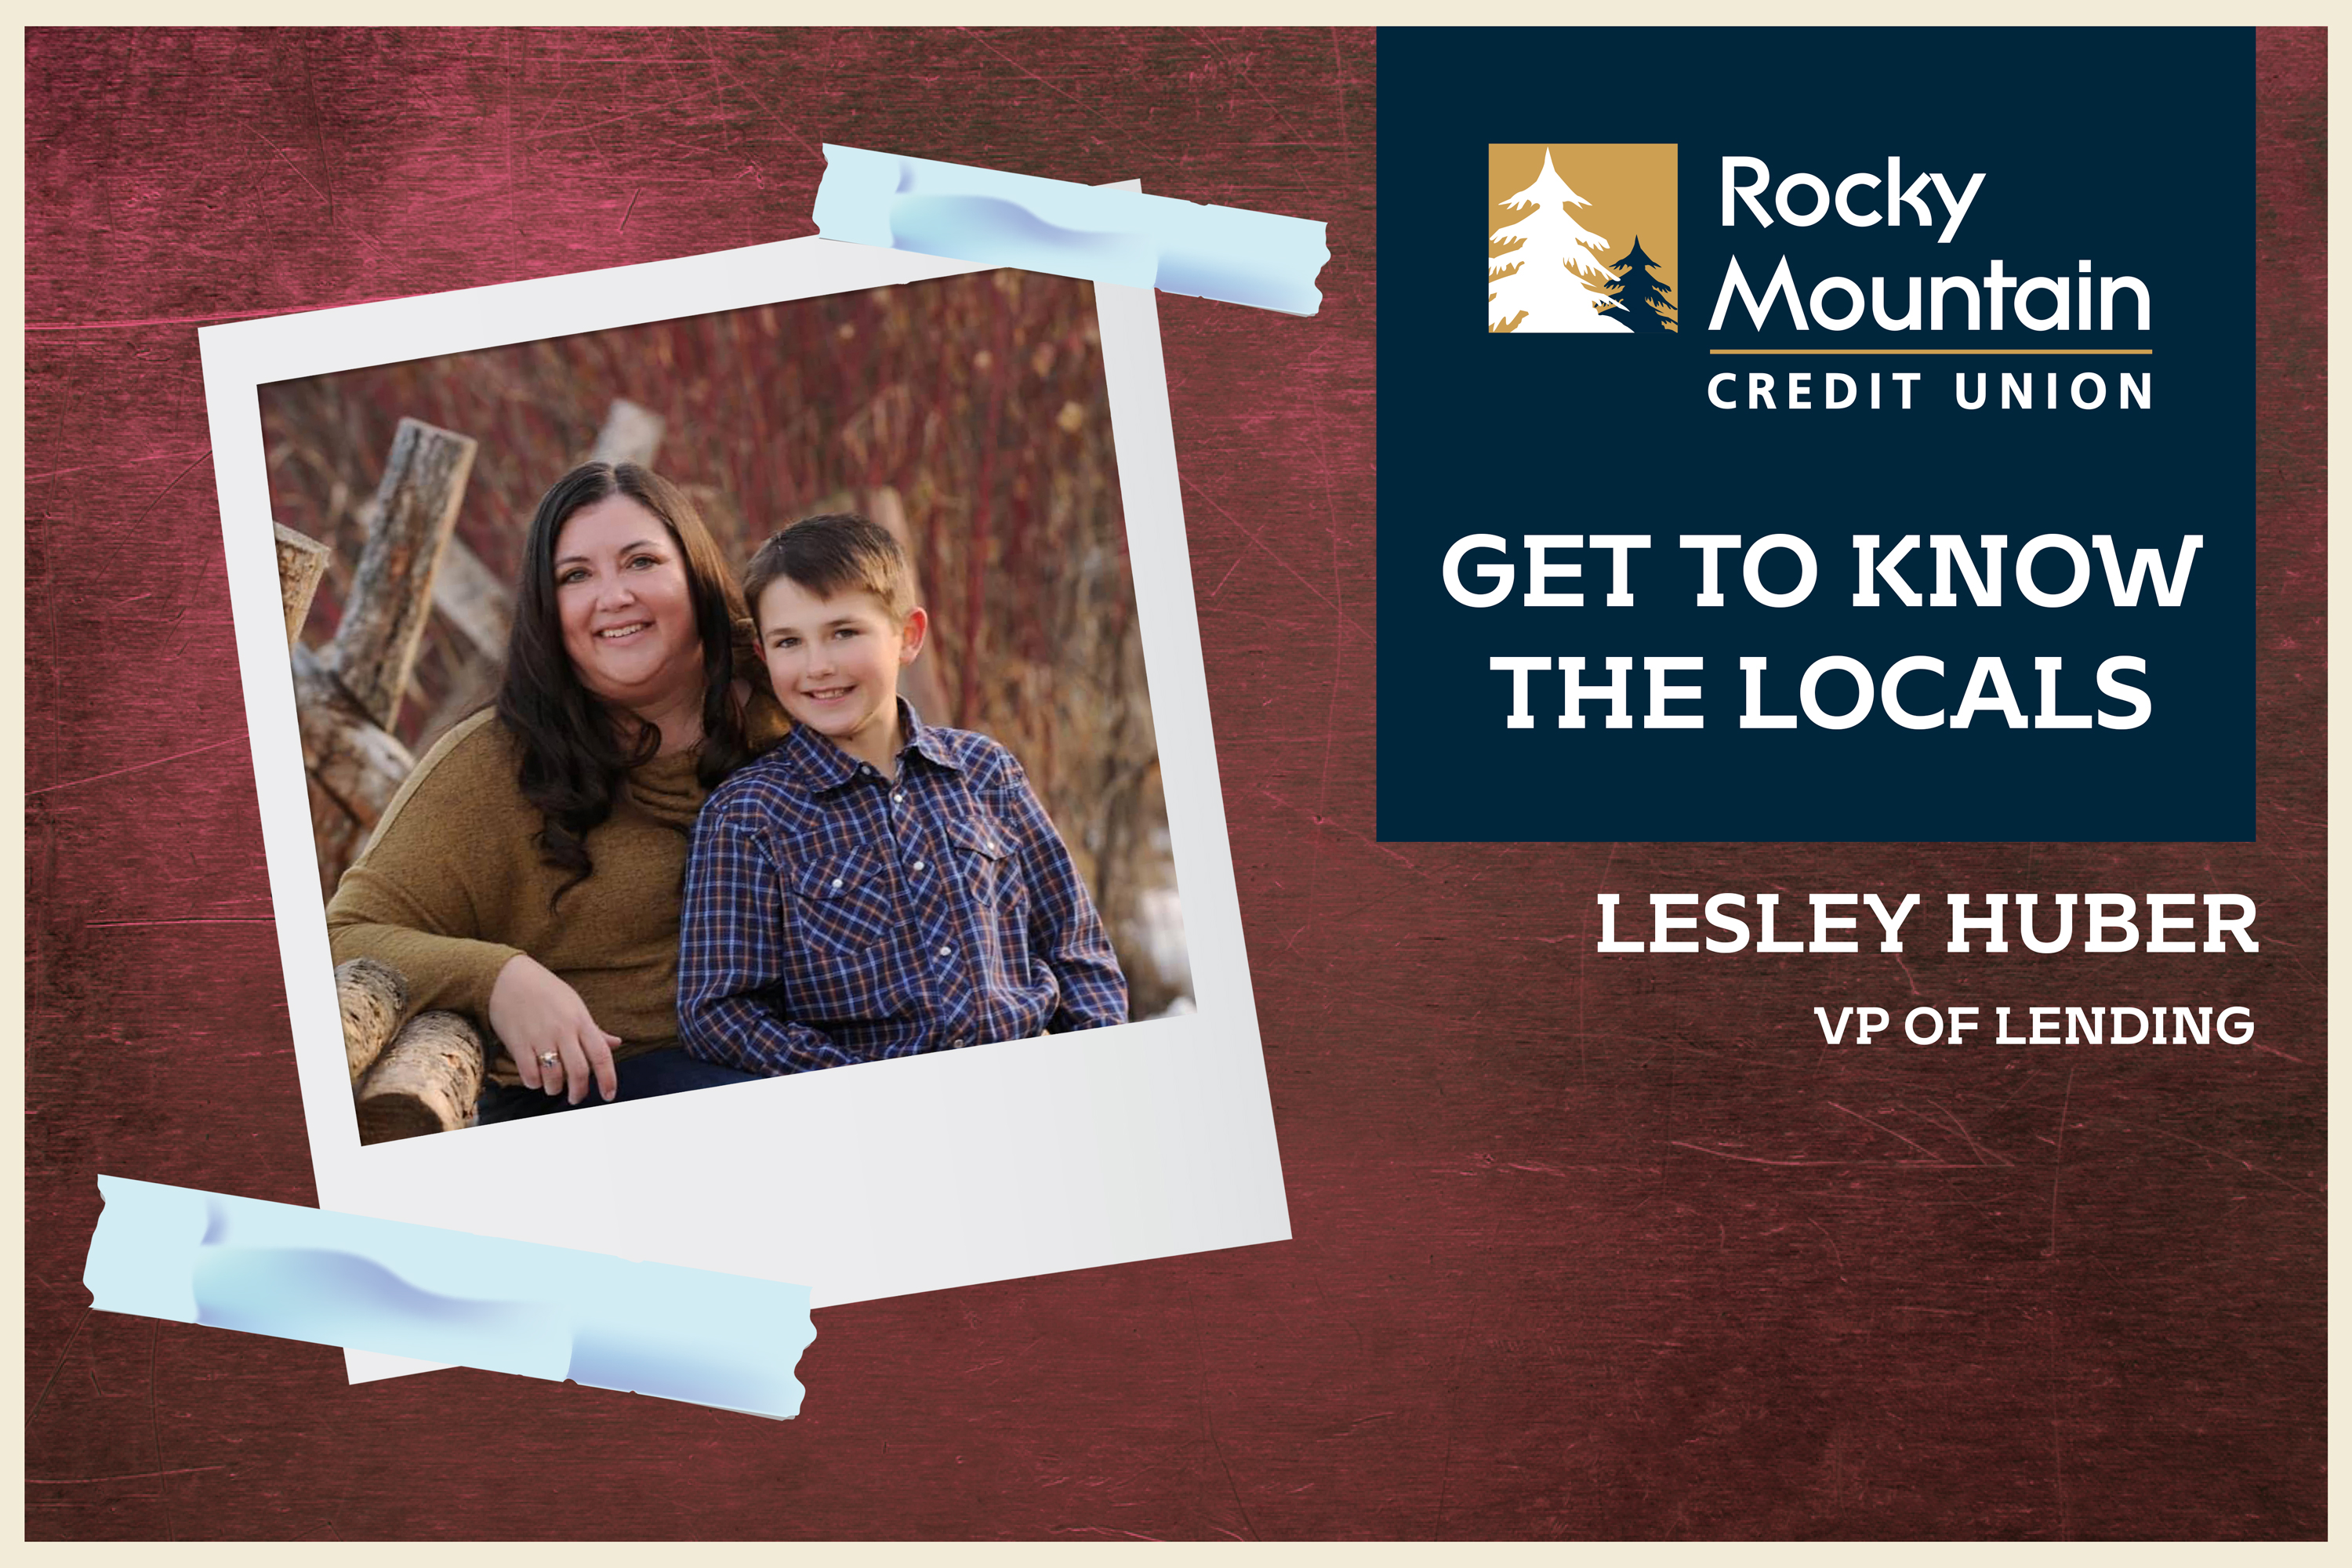 Get to Know the Locals: Lesley Huber, Vice President of Lending